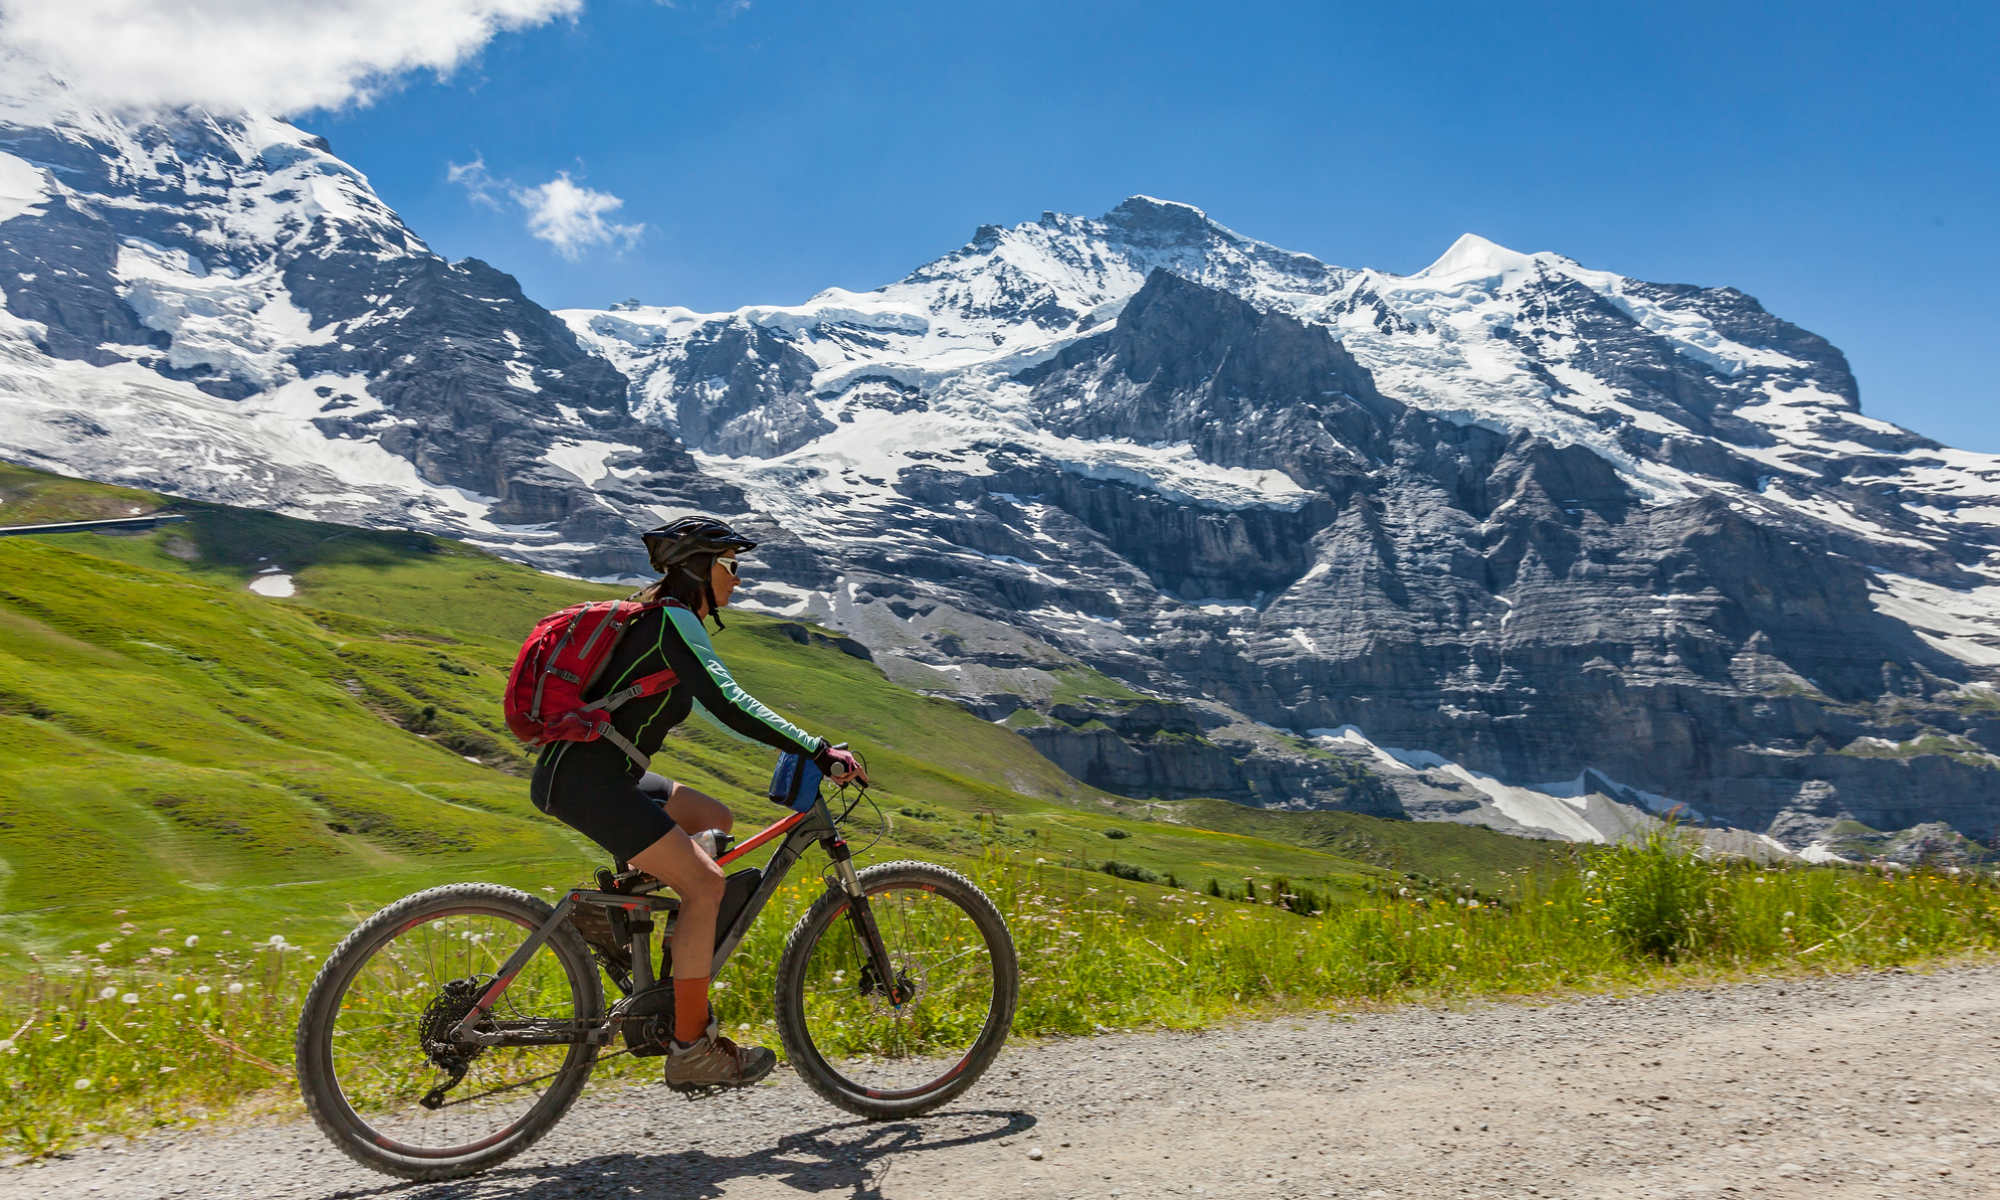 A cyclist is enjoying a sunny day in the mountains.